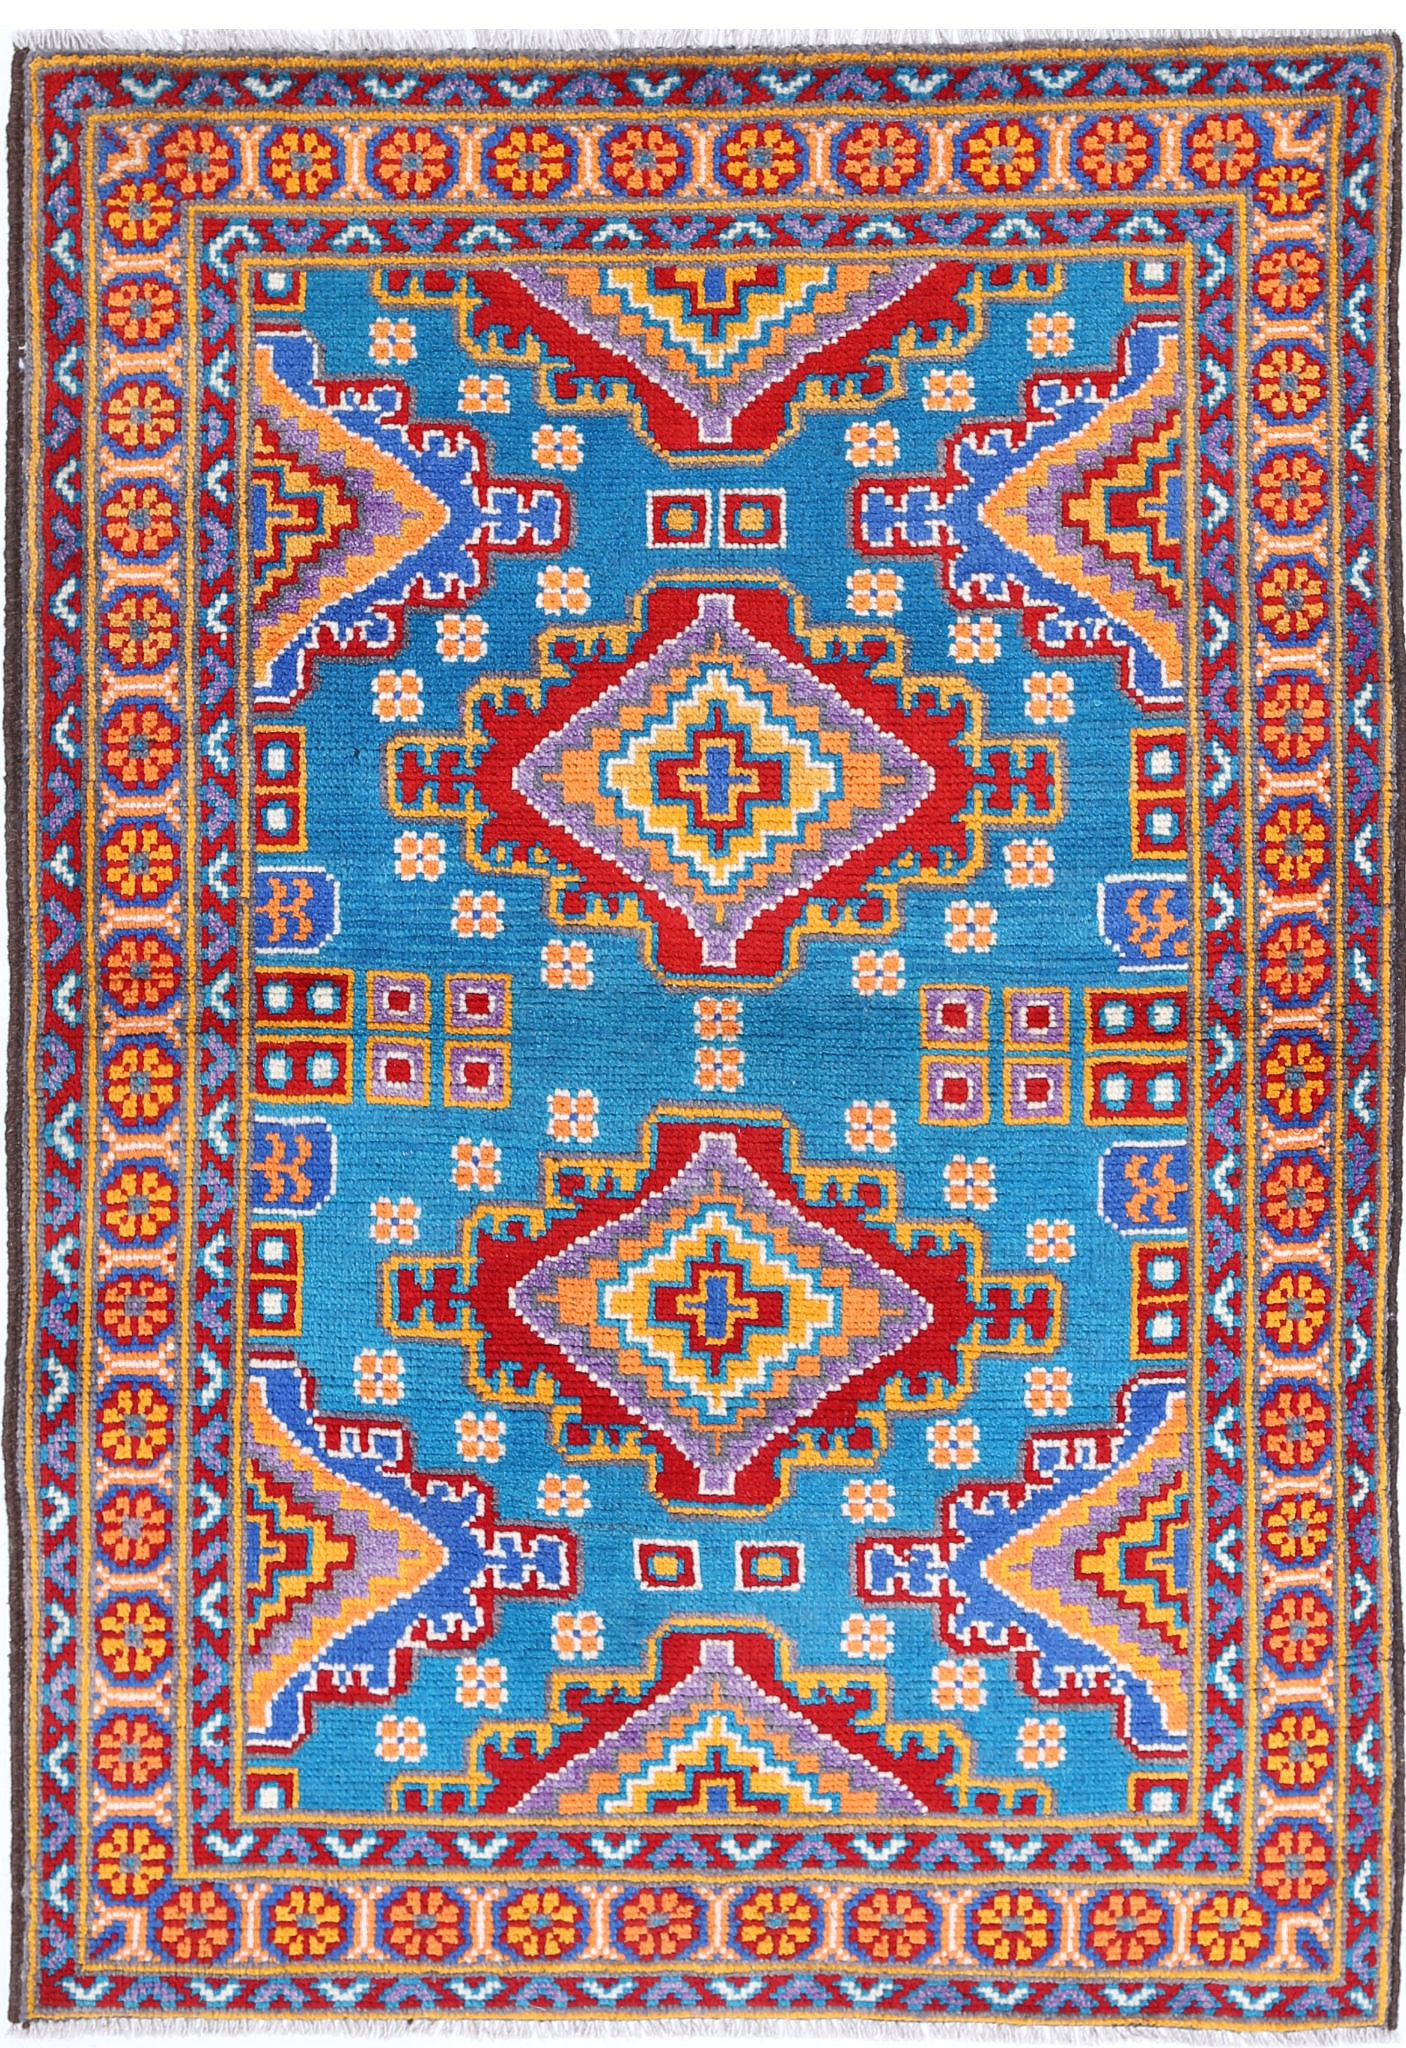 Revival-hand-knotted-qarghani-wool-rug-5014204.jpg